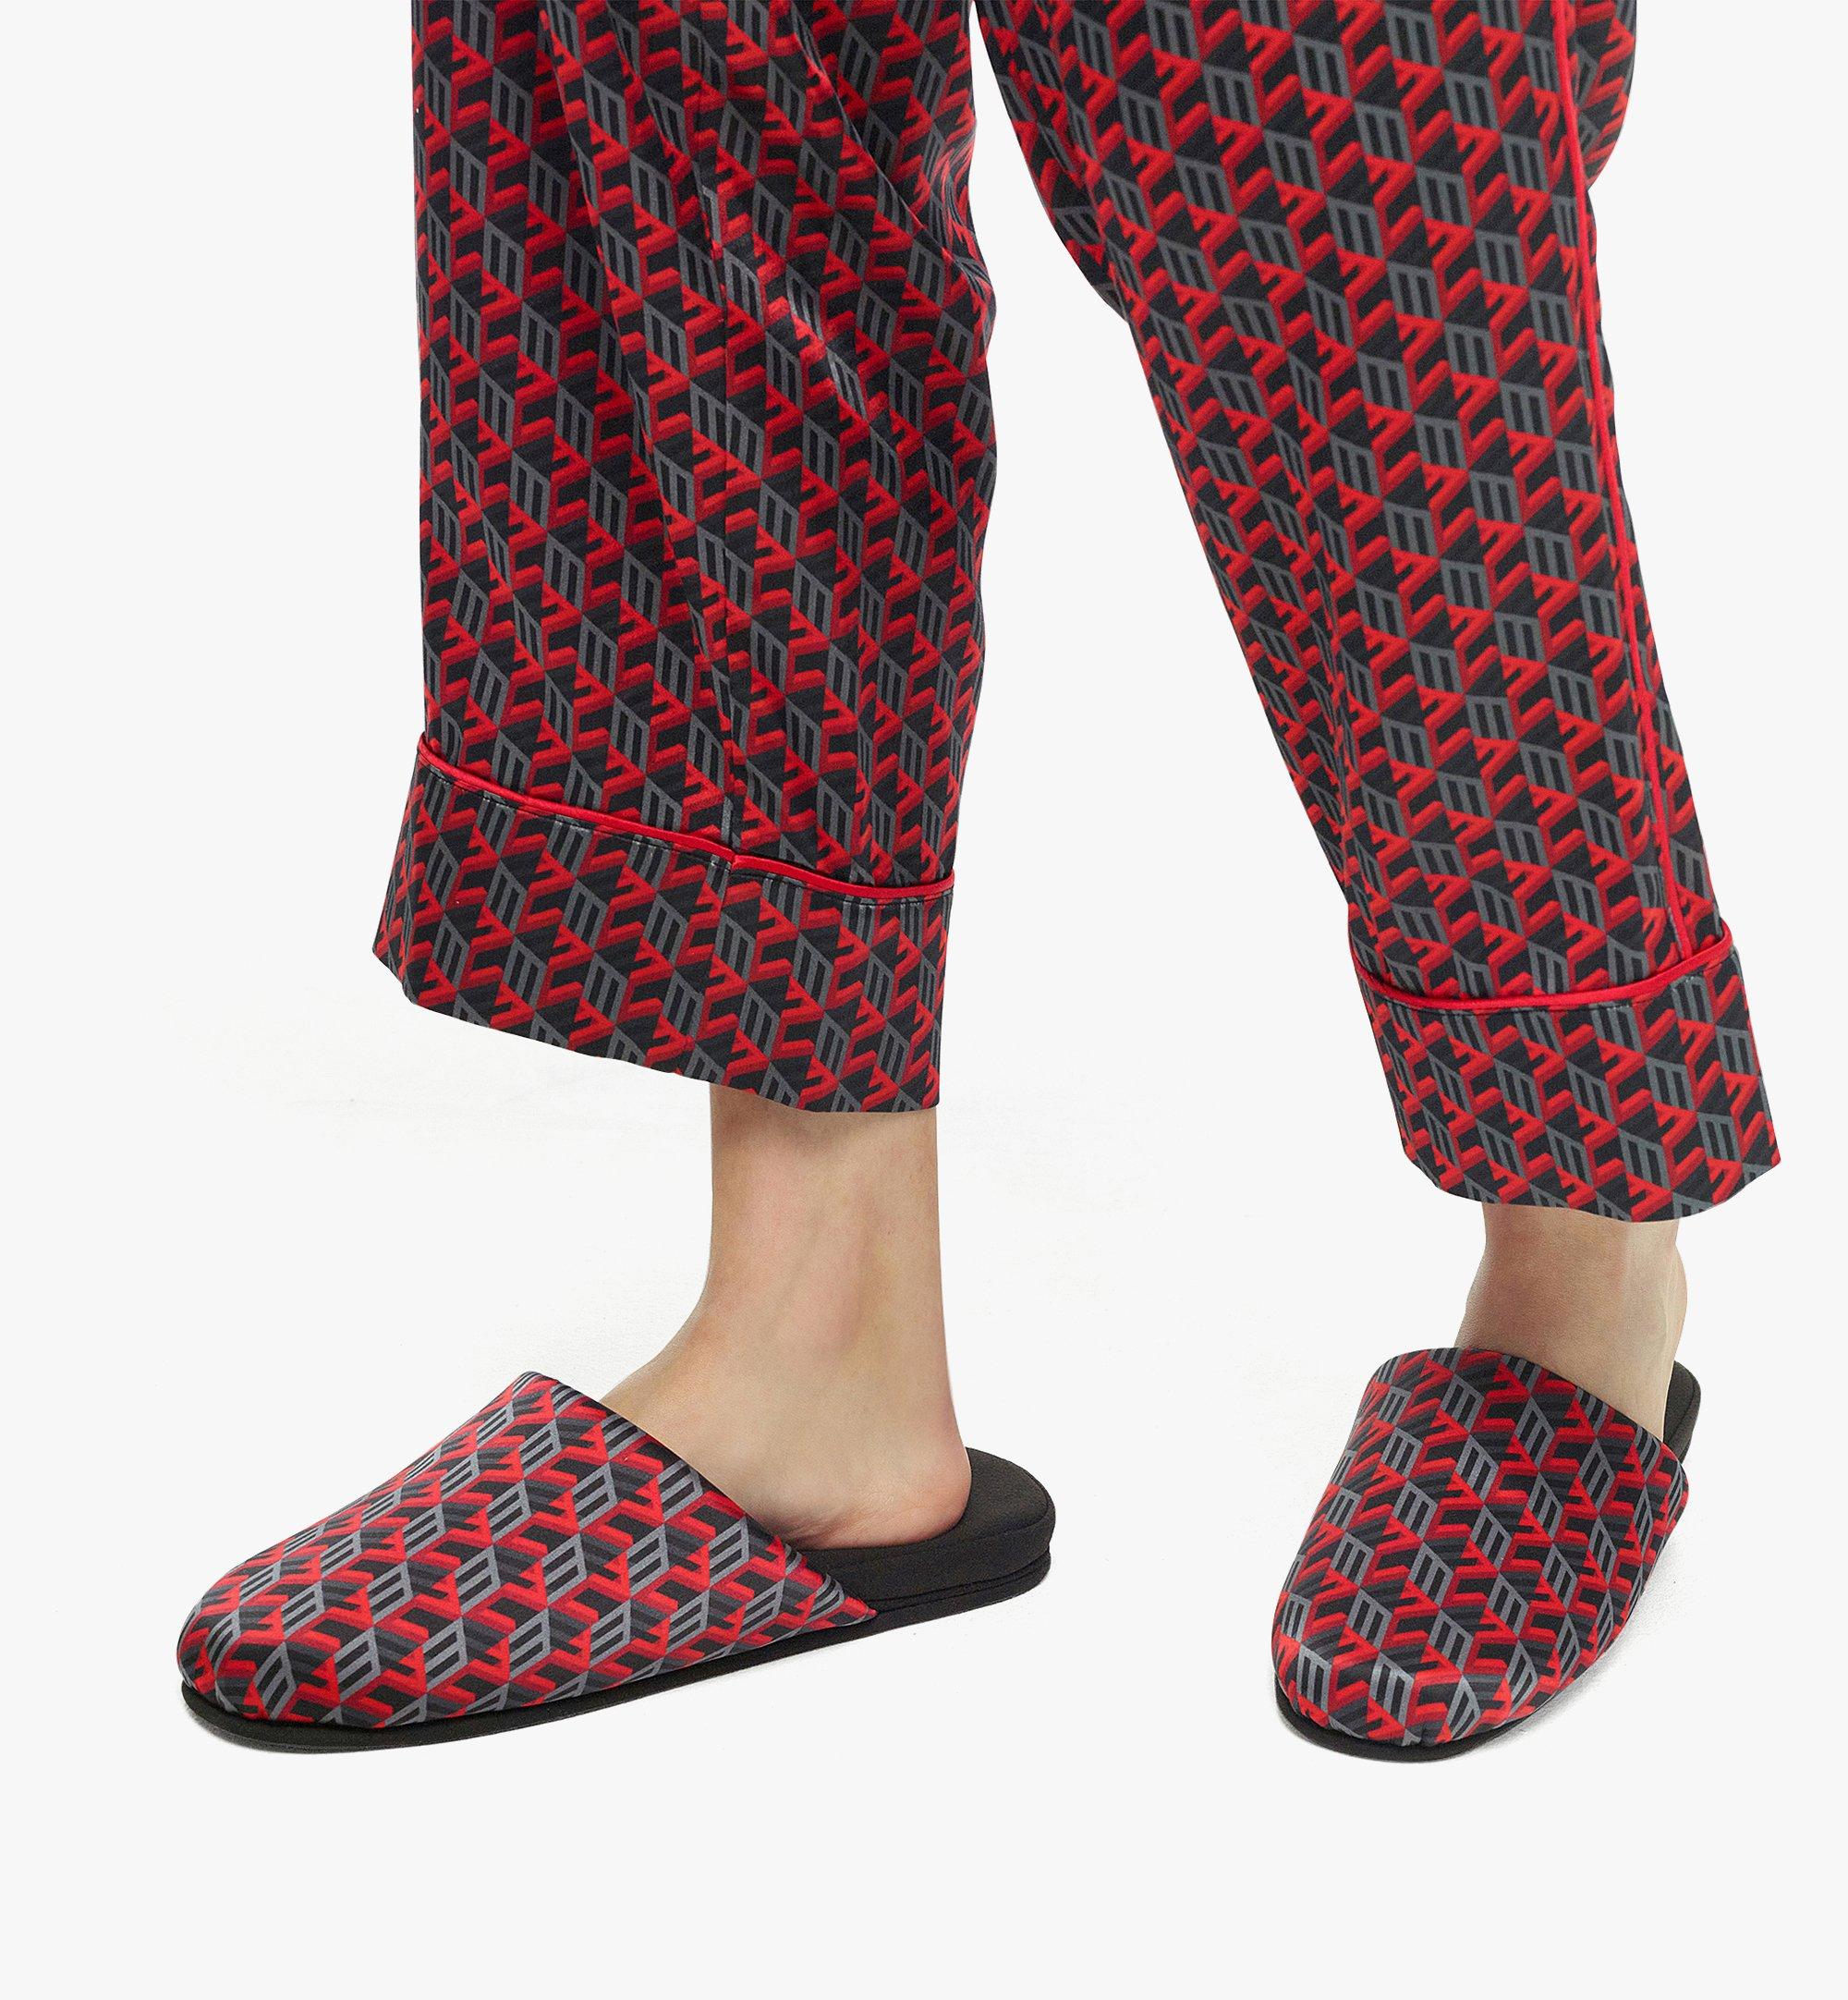 MCM House Slippers in Holiday Cubic Monogram Jacquard Red MEXCSCK11R000S Alternate View 2